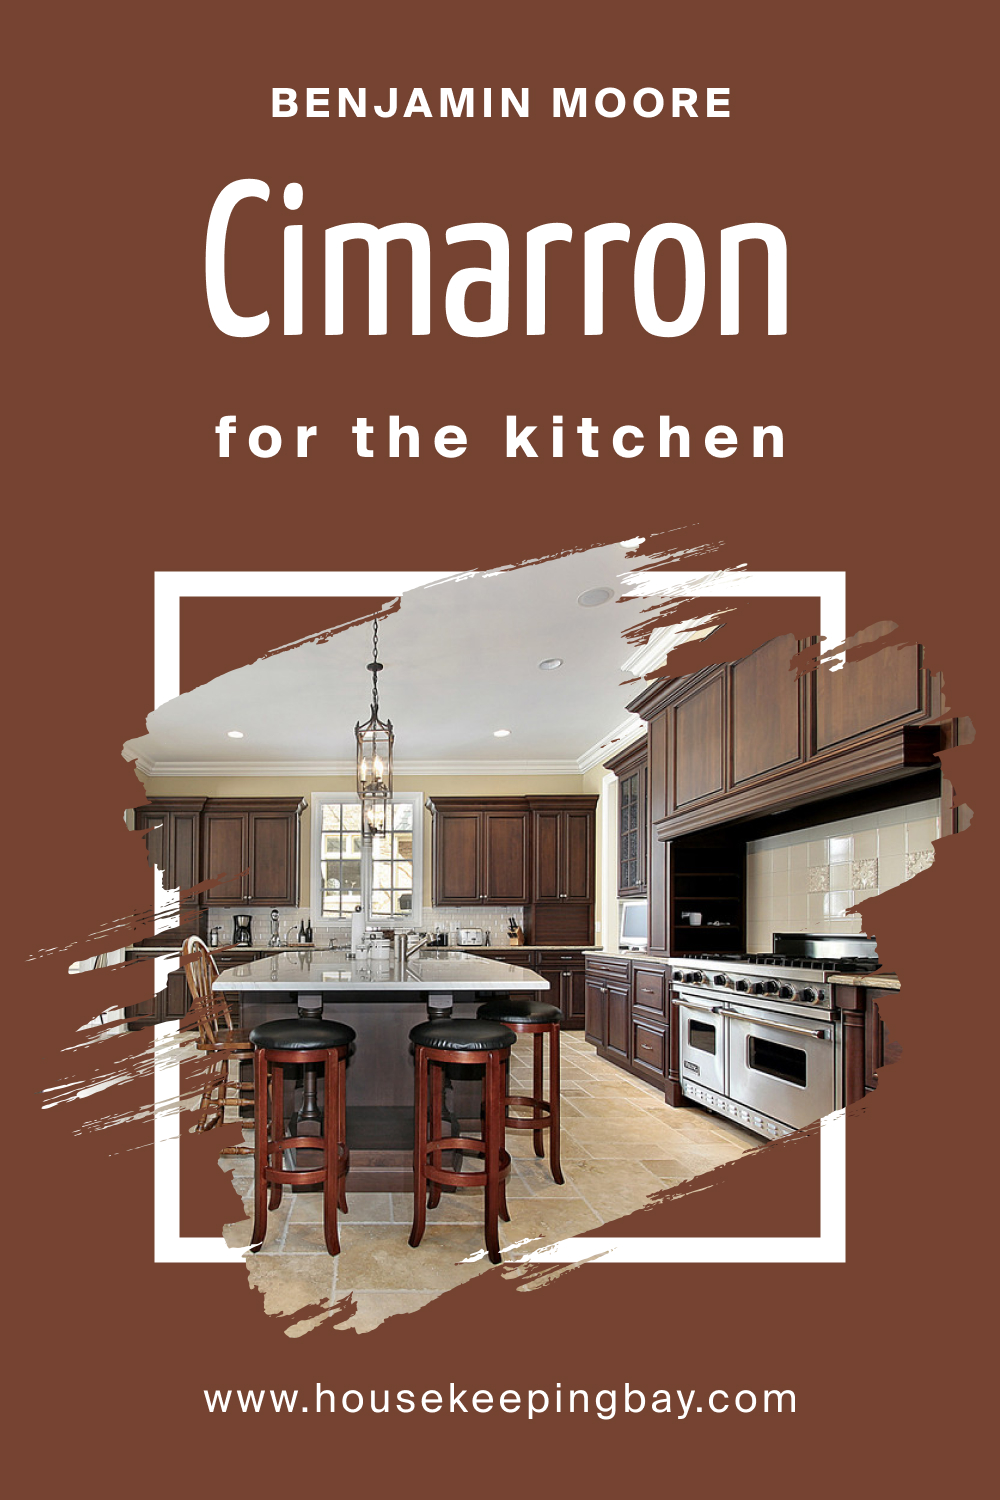 How to Use BM Cimarron 2093-10 in the Kitchen?